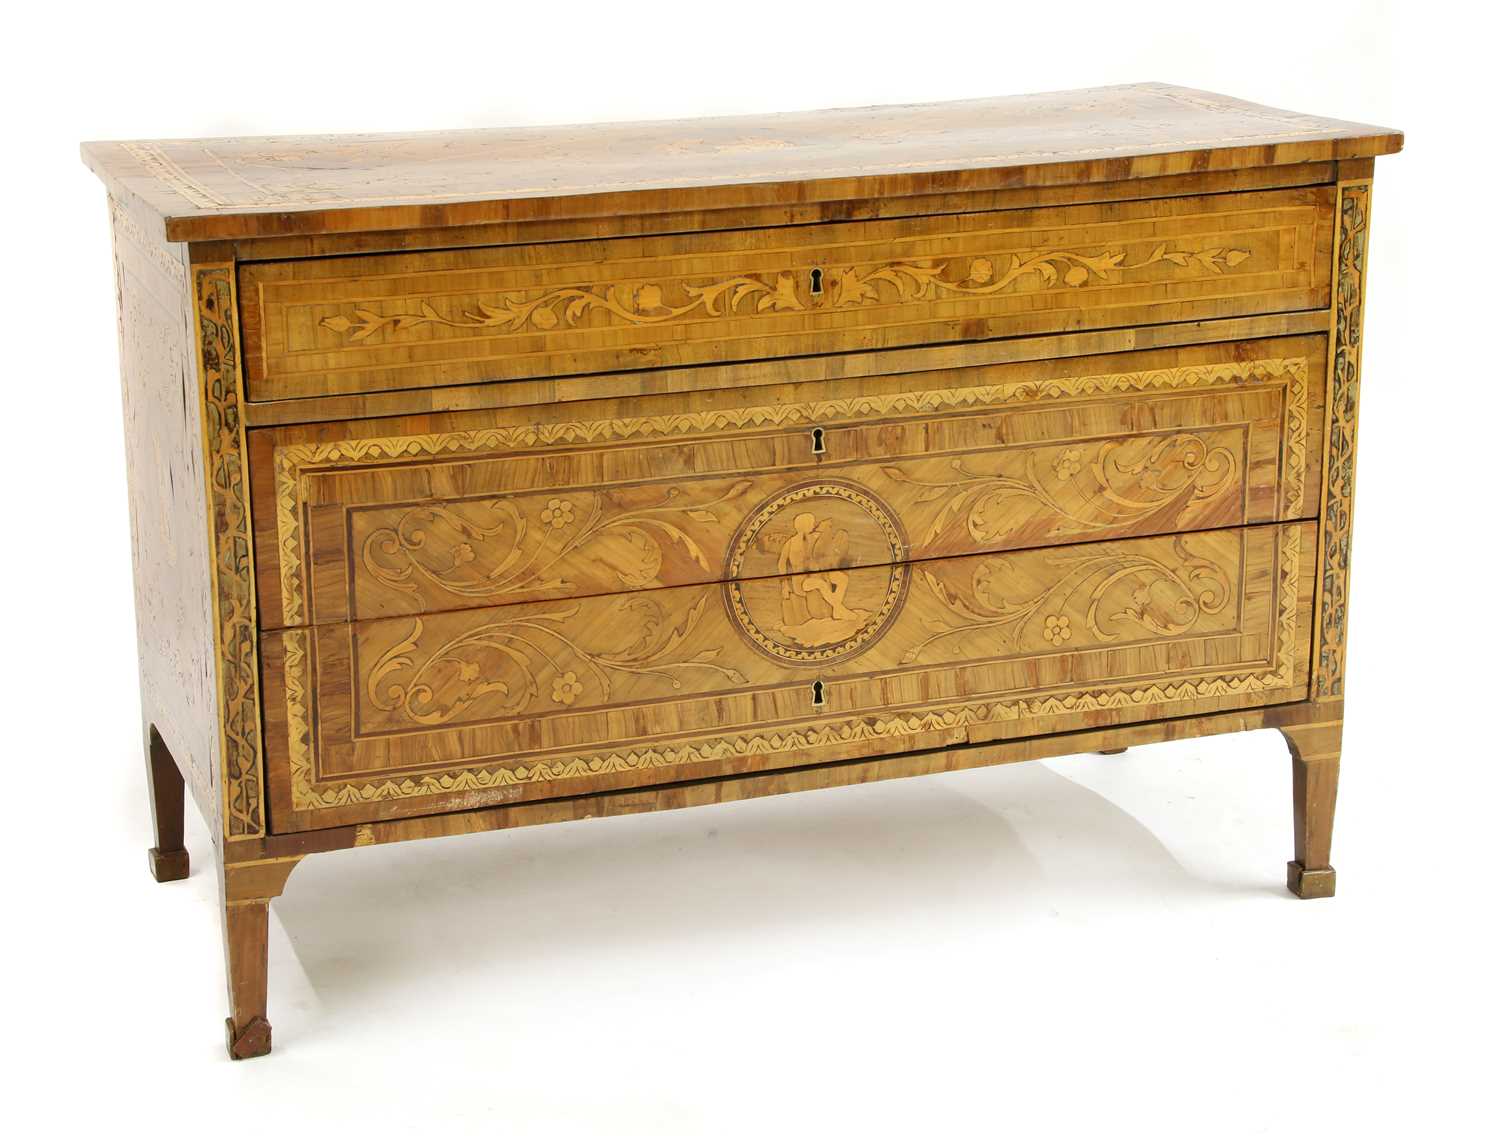 An Italian marquetry-inlaid specimen wood commode, - Image 2 of 6